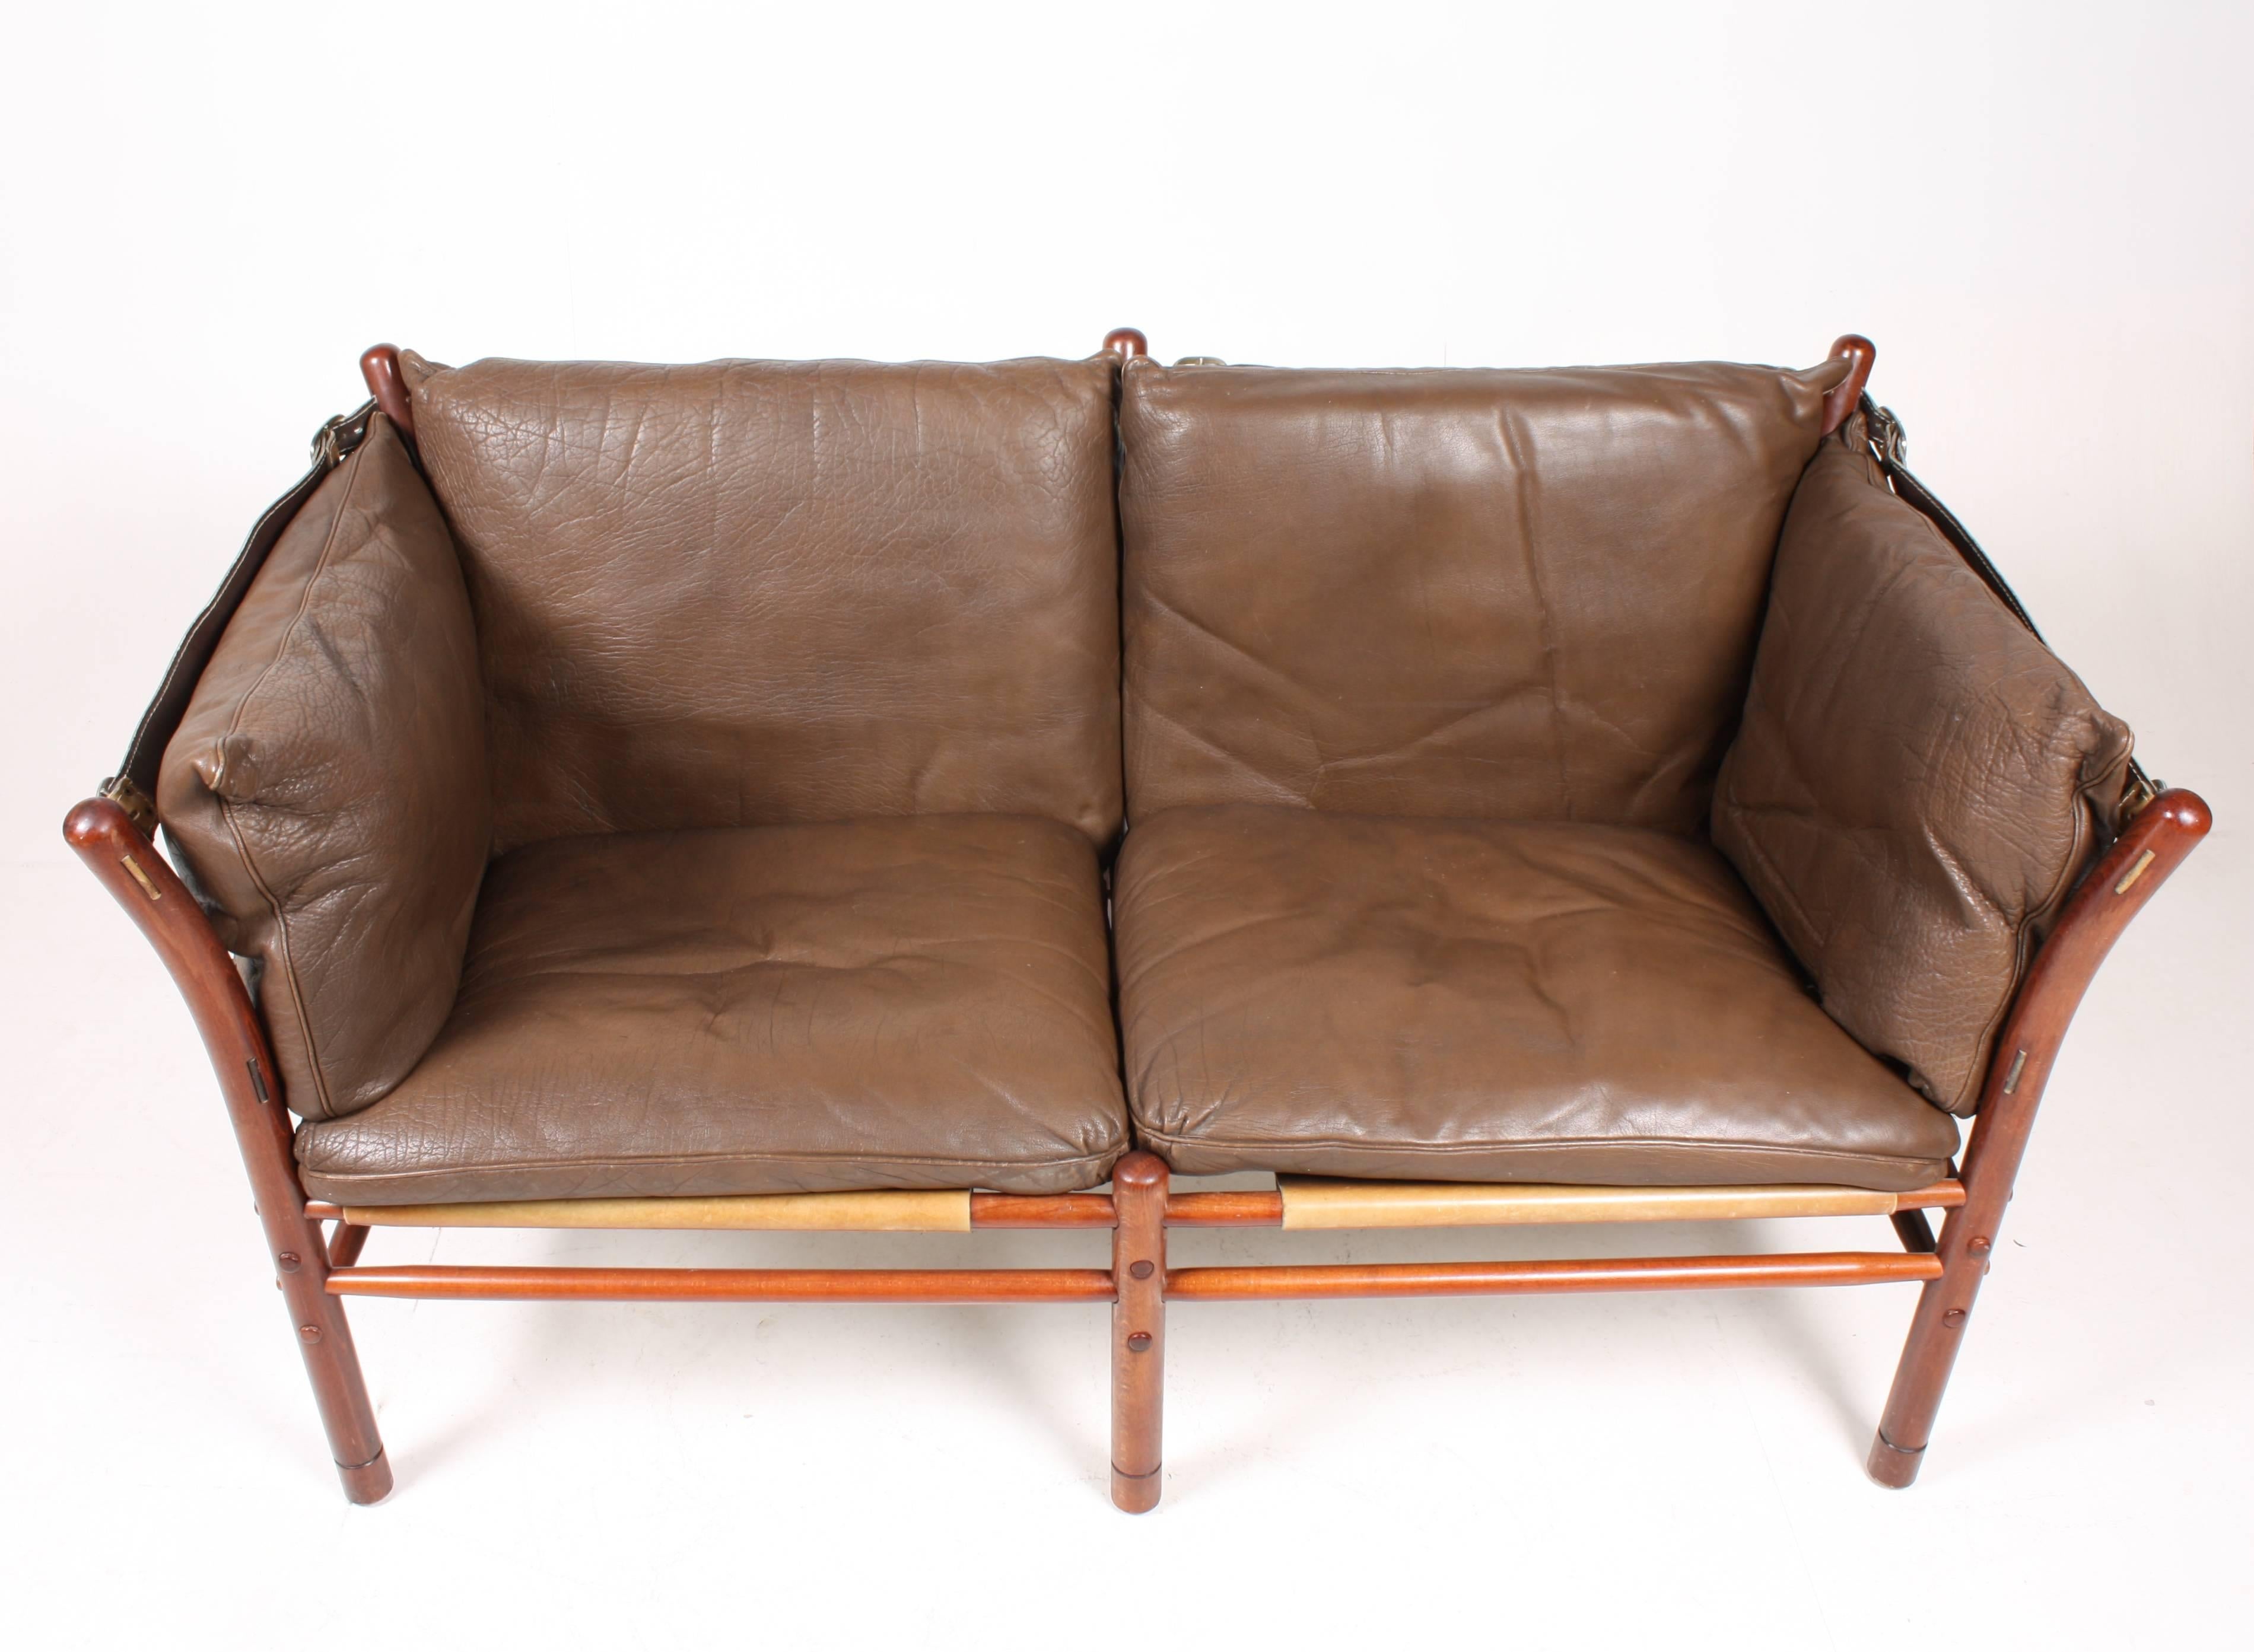 Scandinavian Modern Ilona Sofa in Patinated Leather by Arne Norell